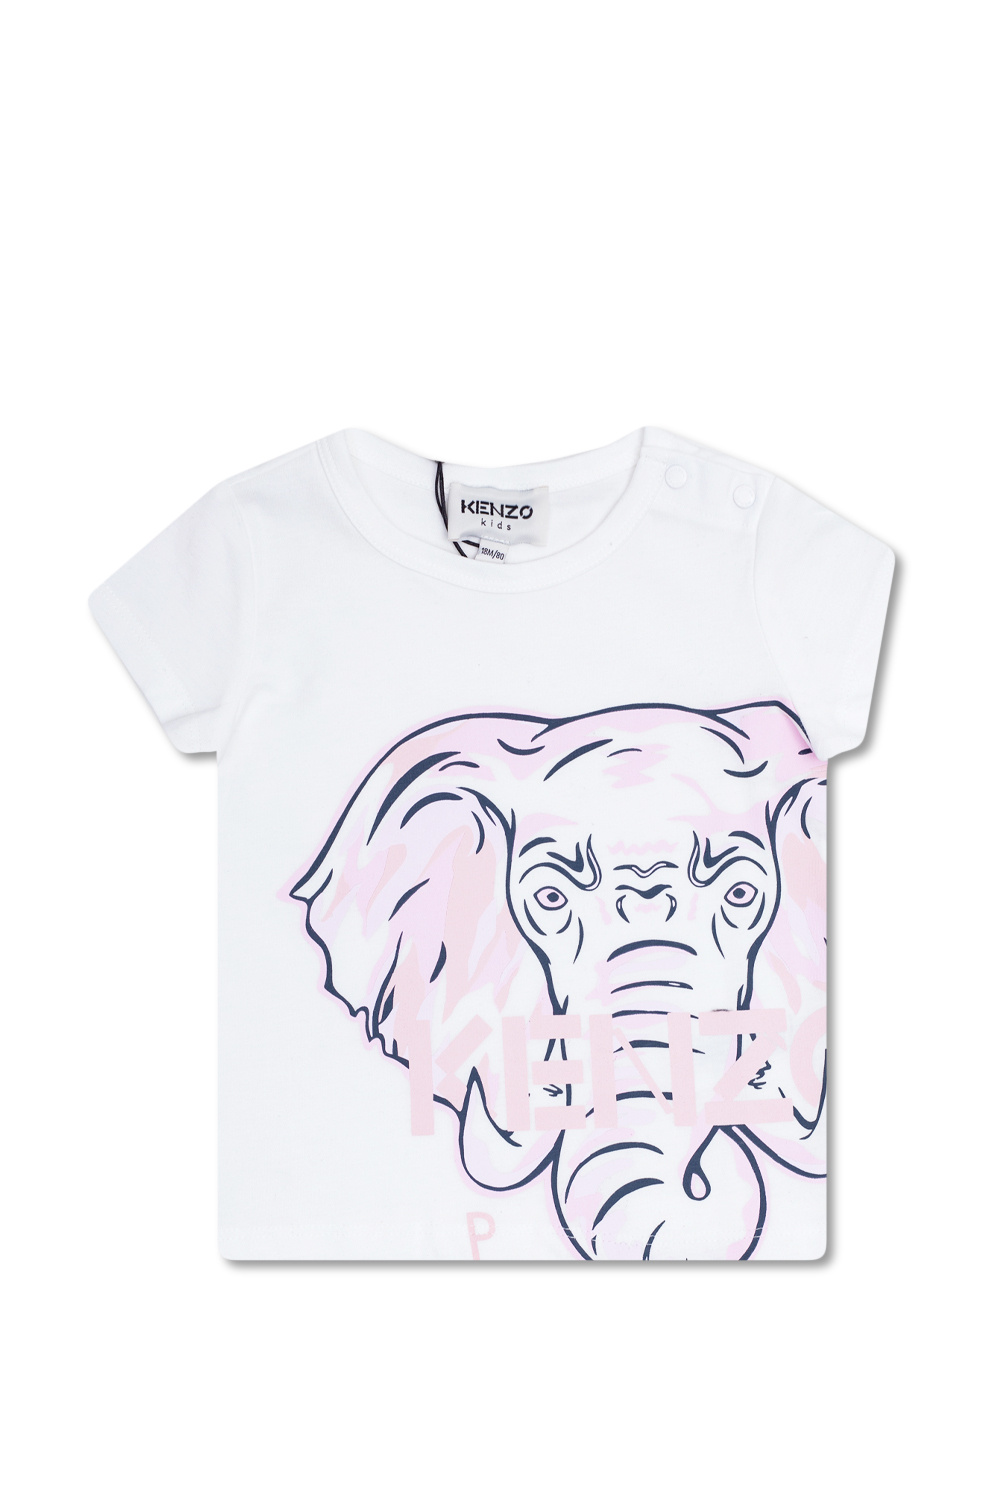 Kenzo Kids Andersson Bell Clothing for Women